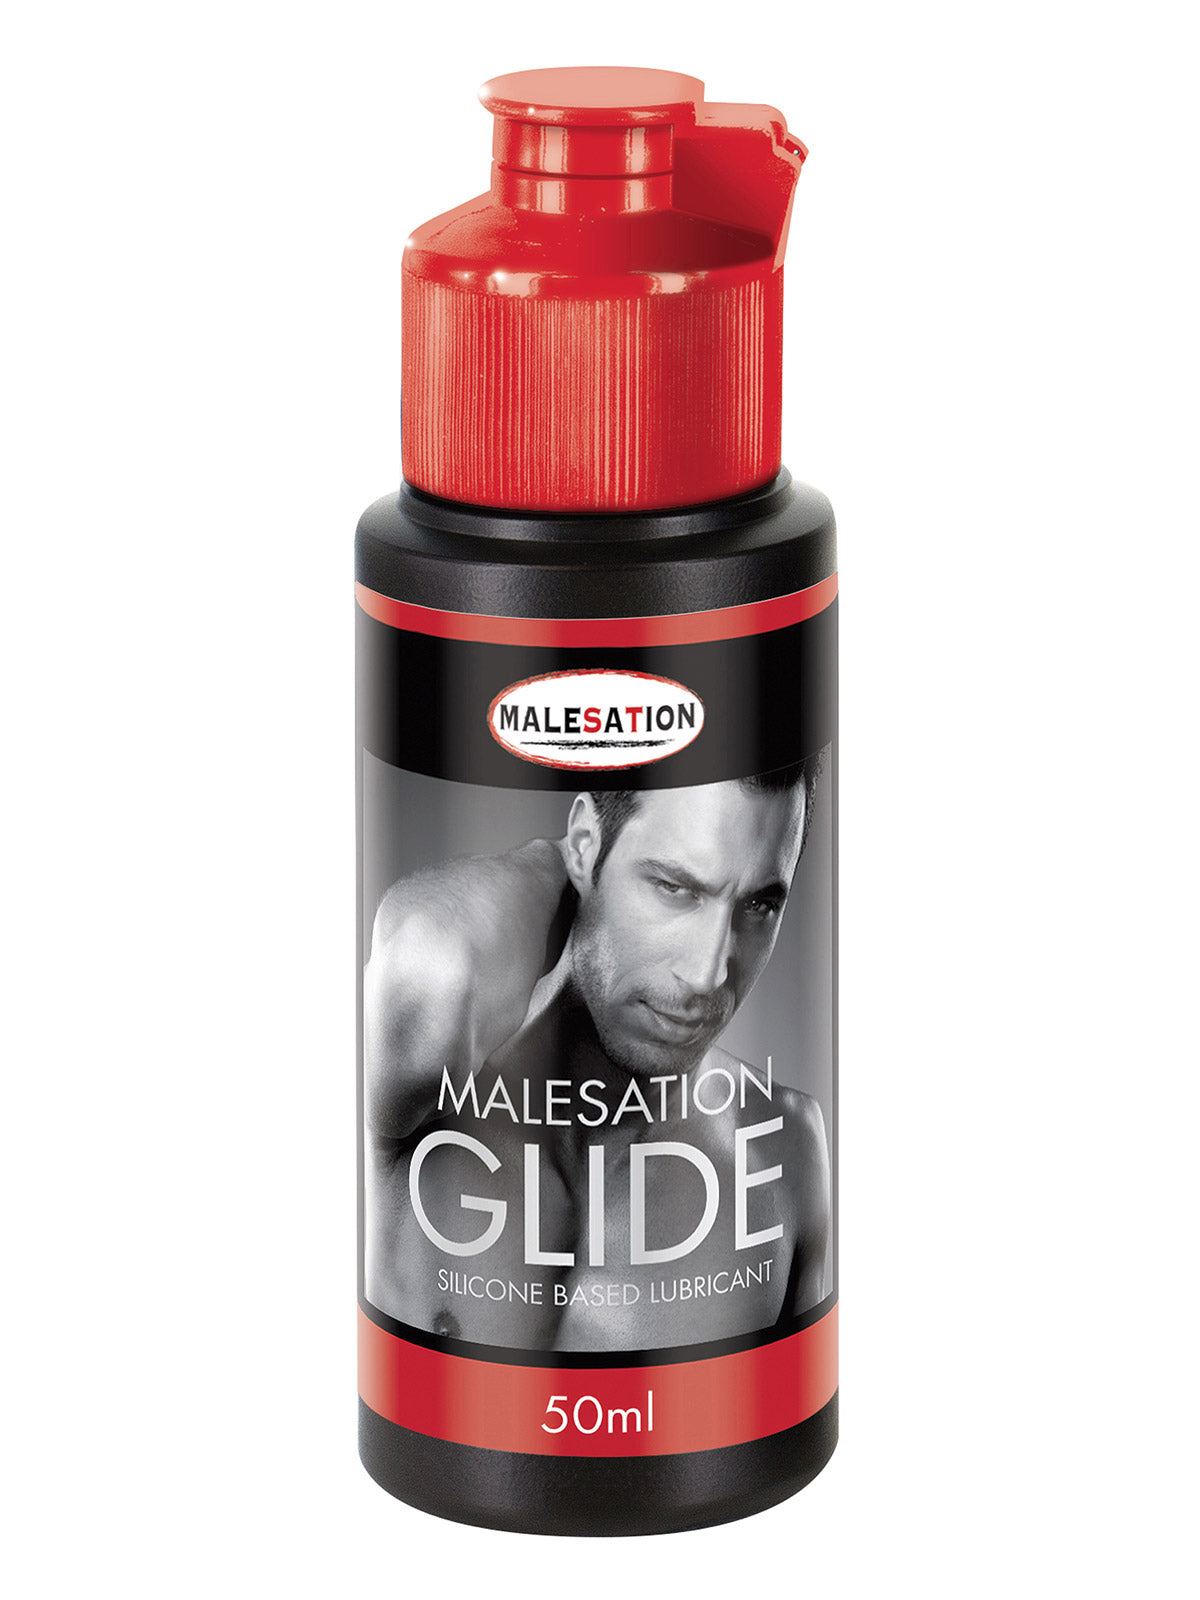 Malesation Glide | Silicone Based Lubricant